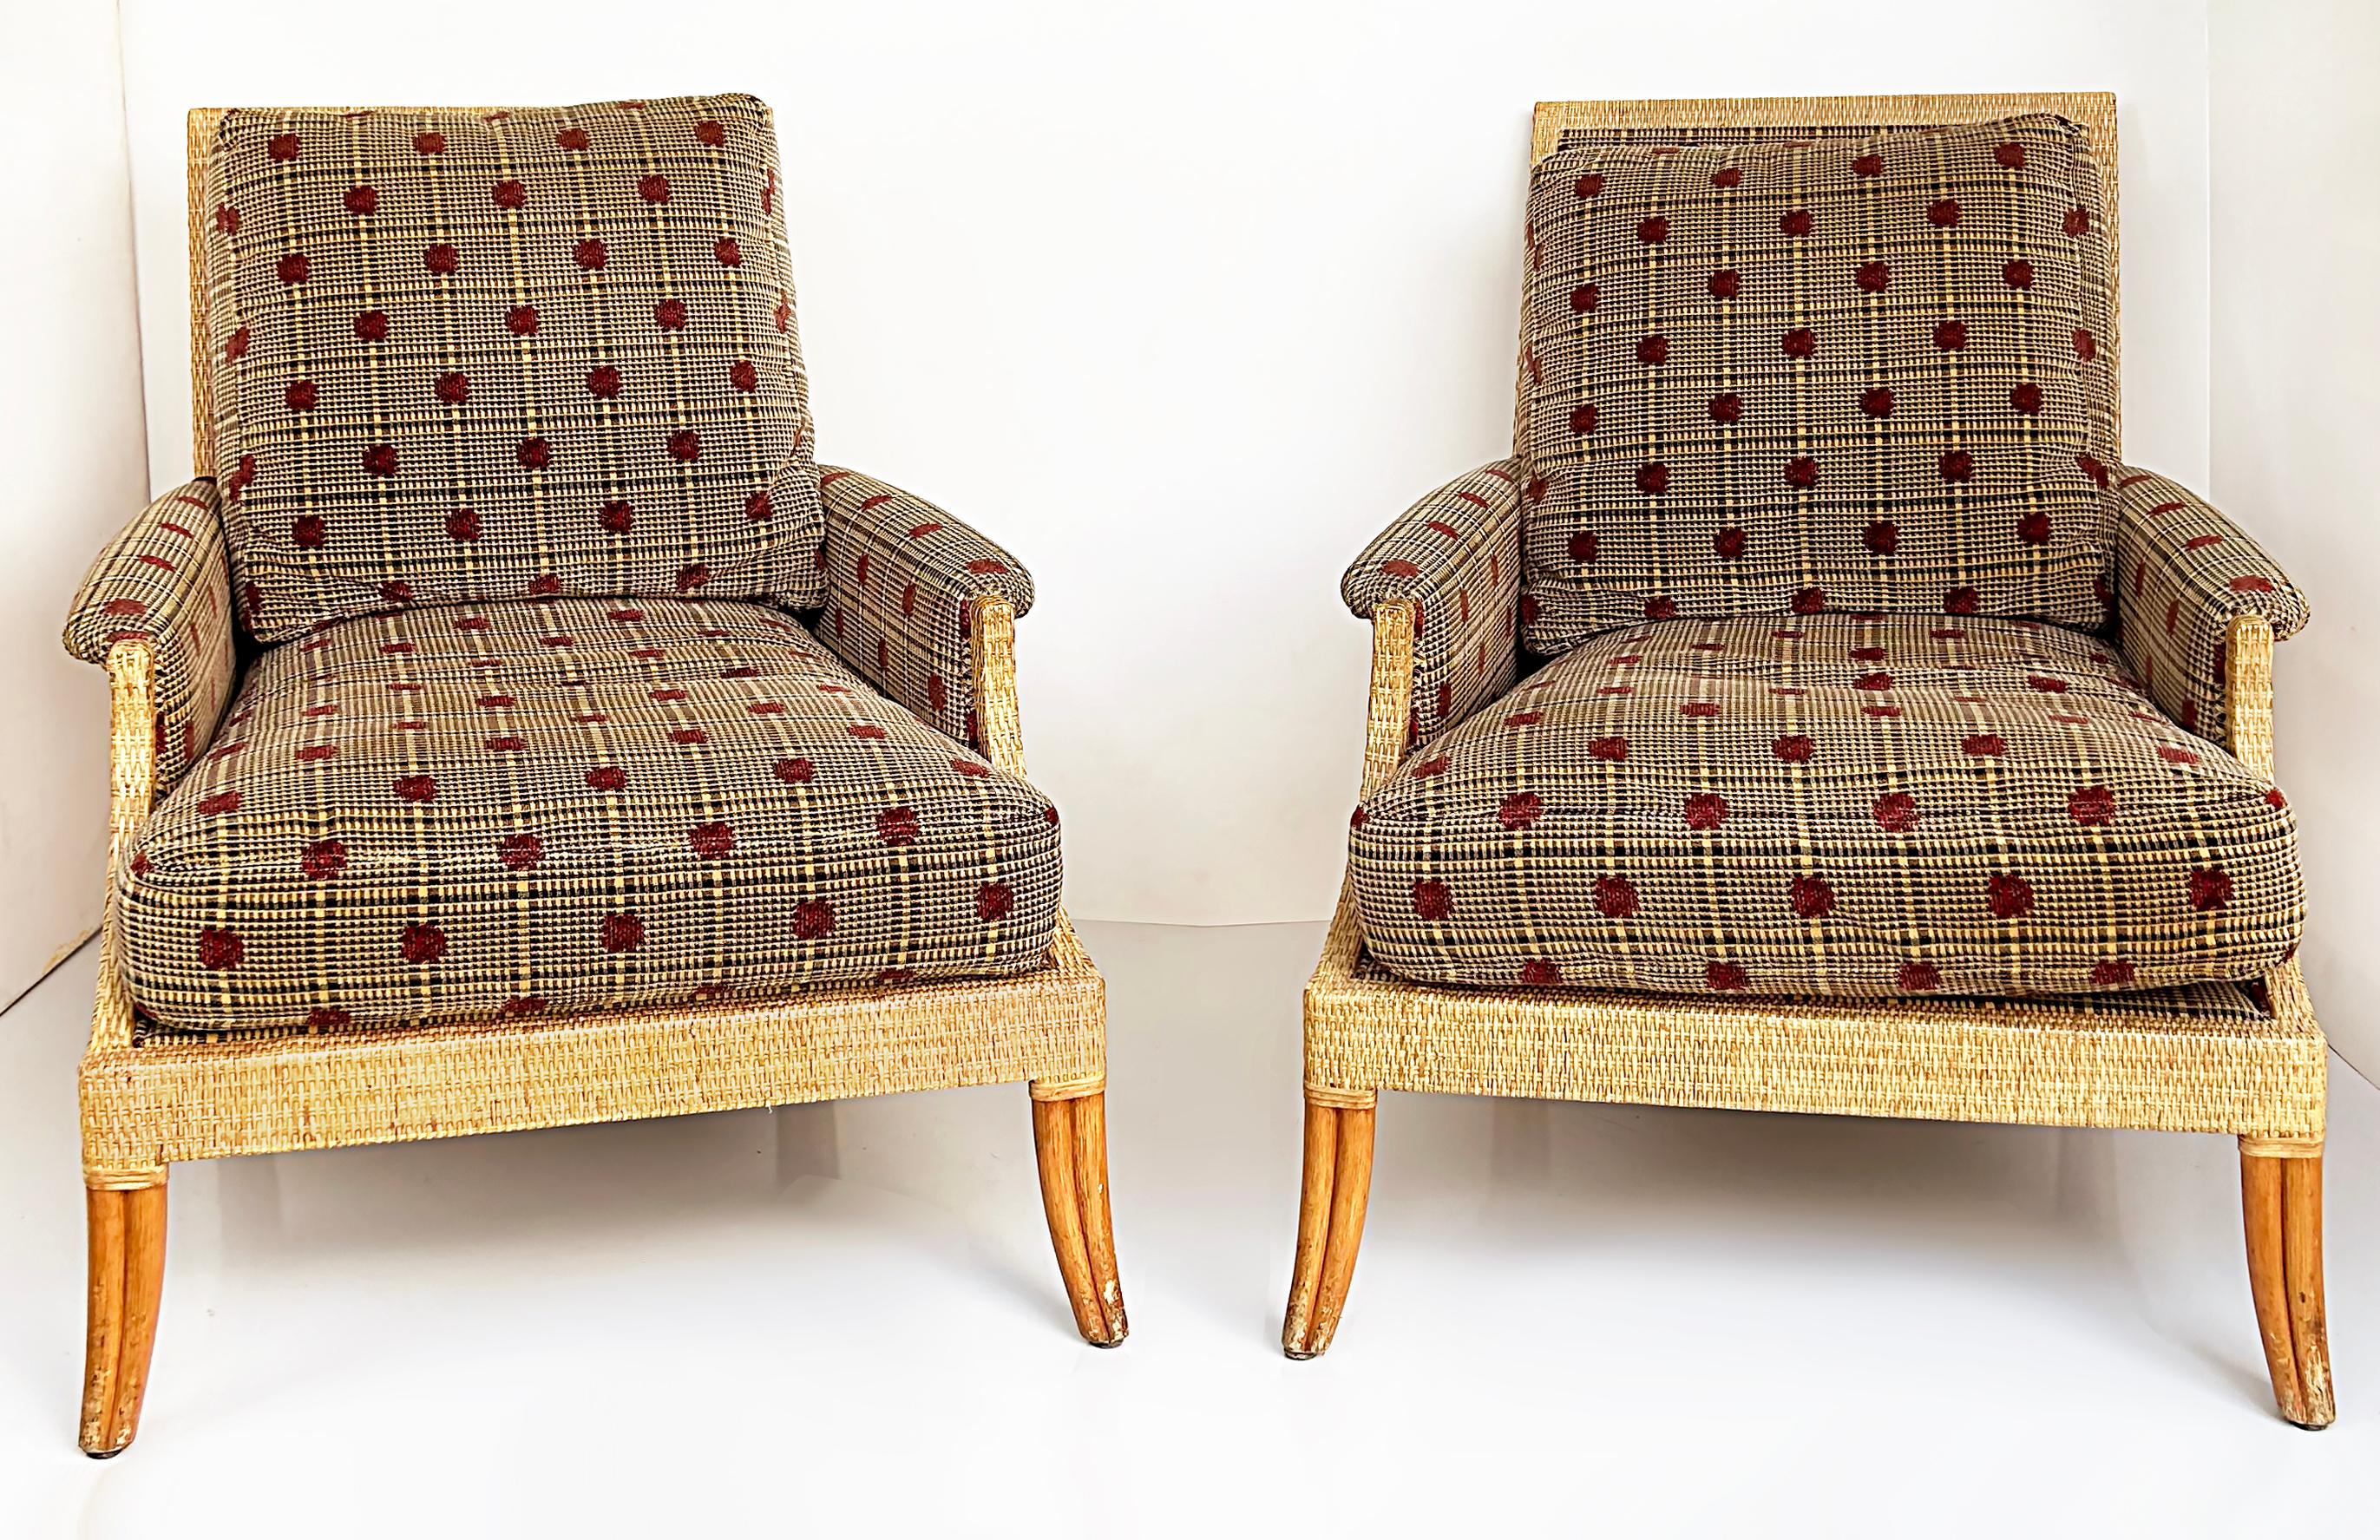 Vintage Orlando Diaz-Azcuy Club Chairs, McGuire Furniture San Francisco, Pair

Offered for sale is a pair of McGuire 